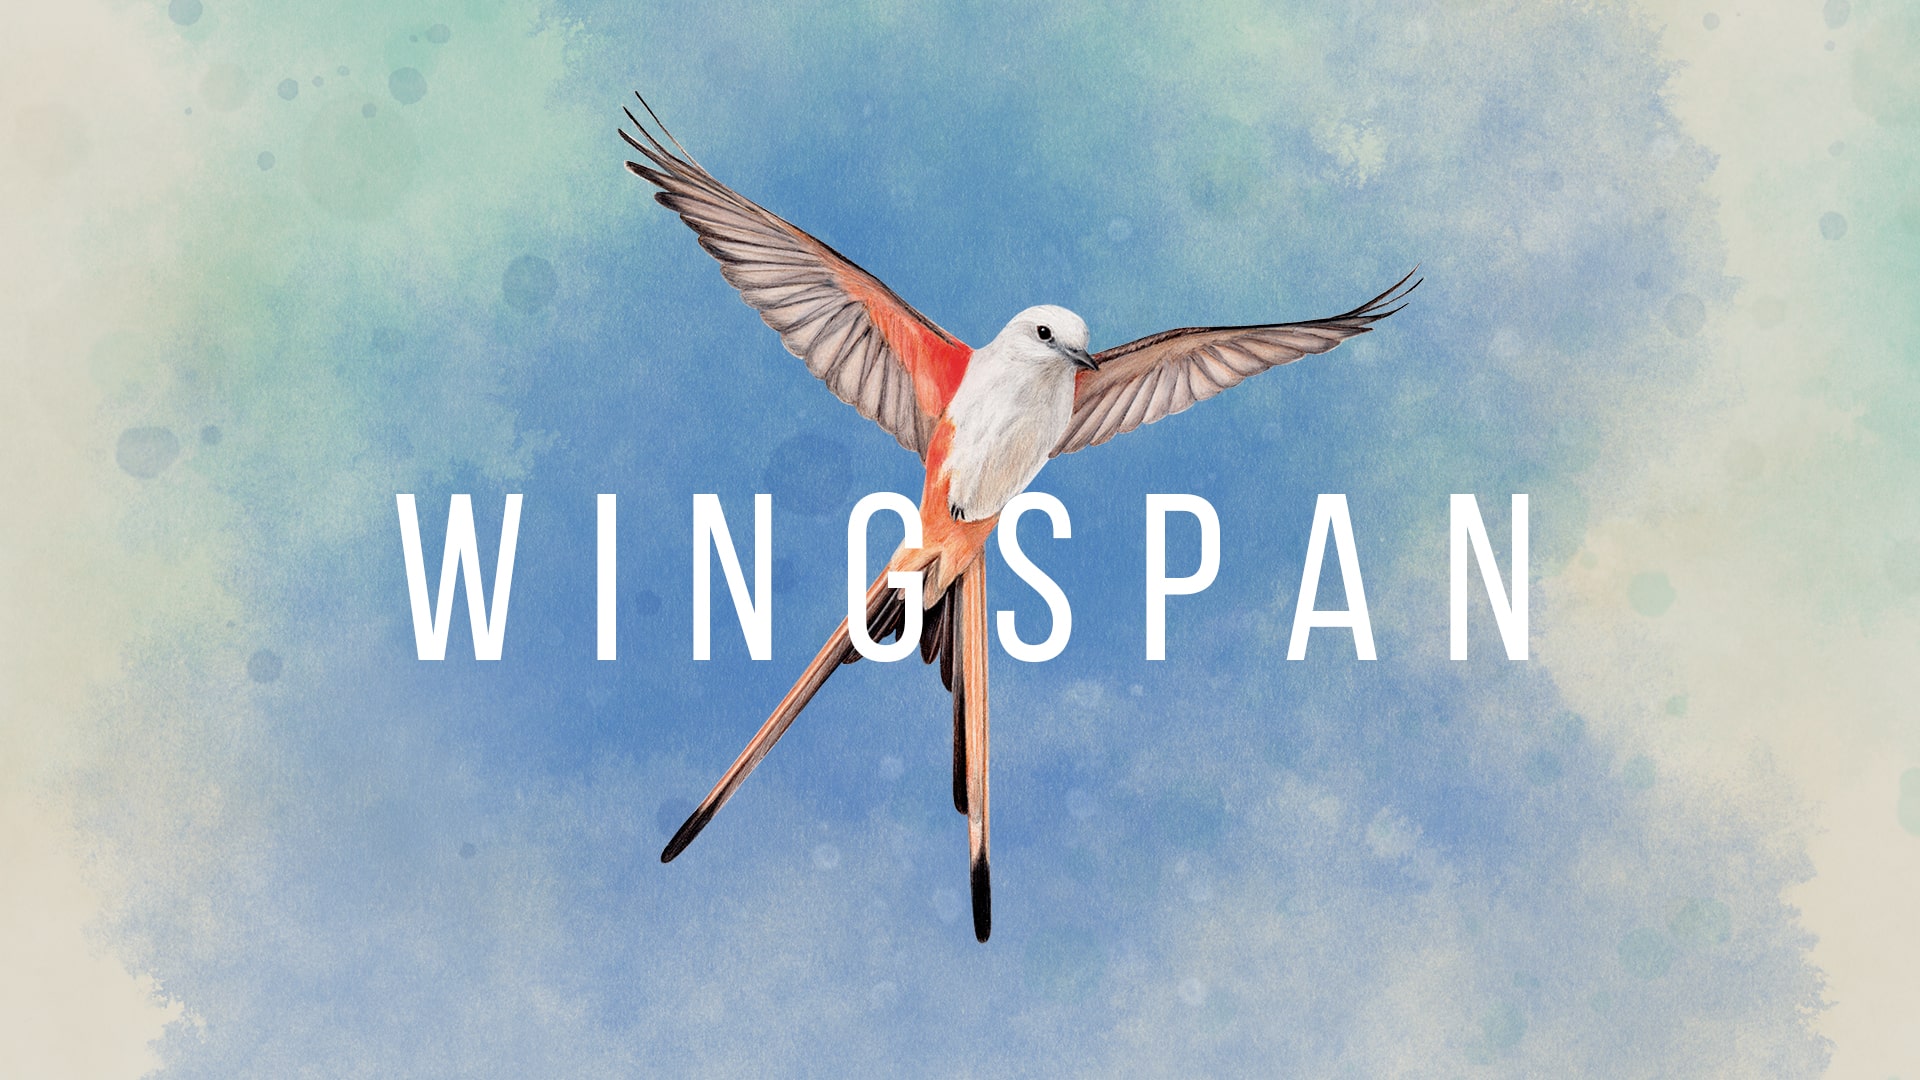 Wingspan instal the new version for ios